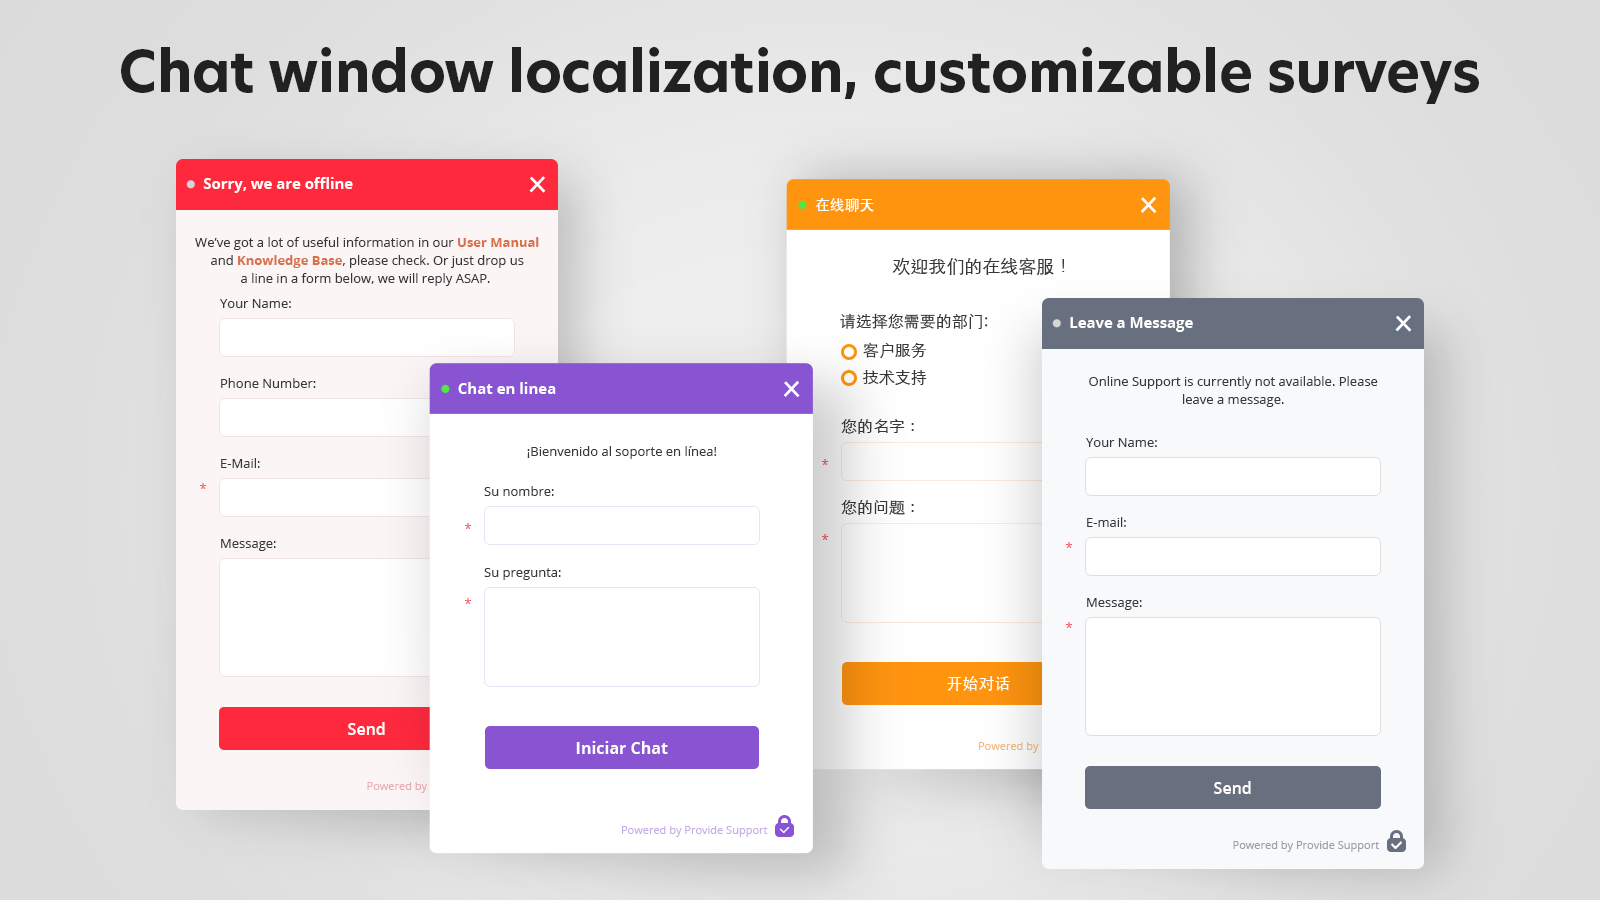 More than 40 languages, wide customization options